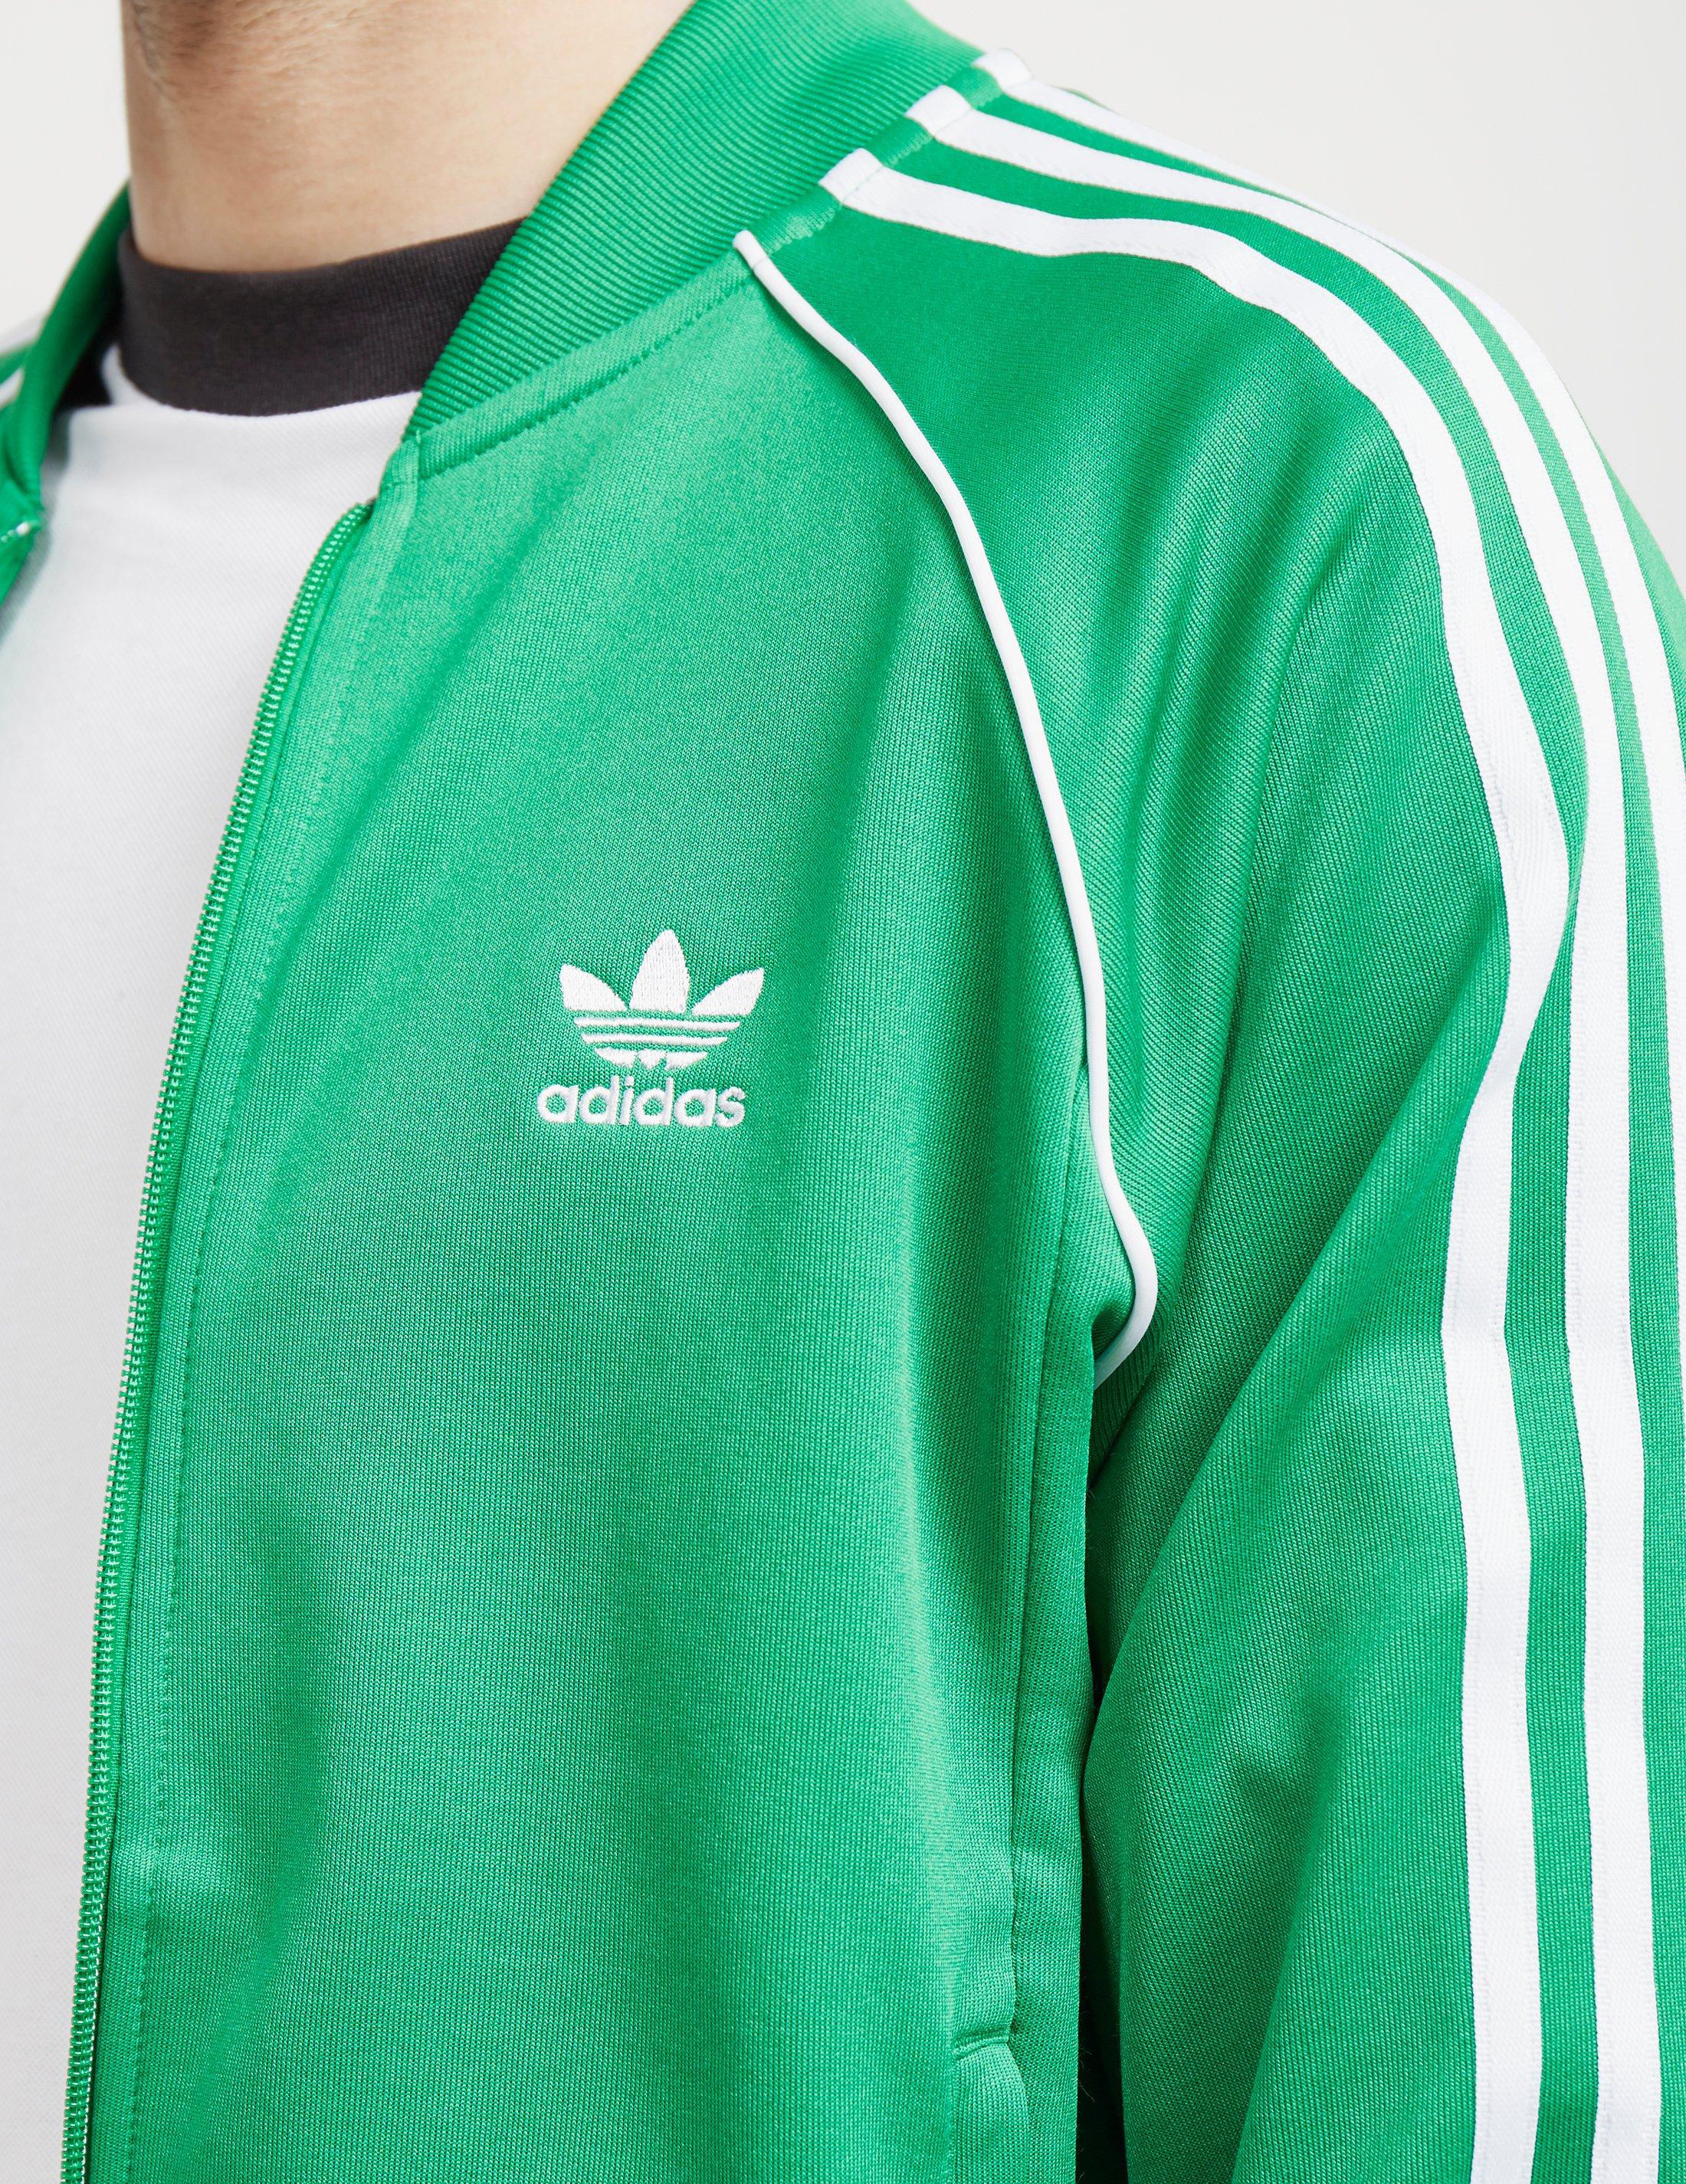 adidas Originals Synthetic Tracksuit Top in Green for Men - Lyst